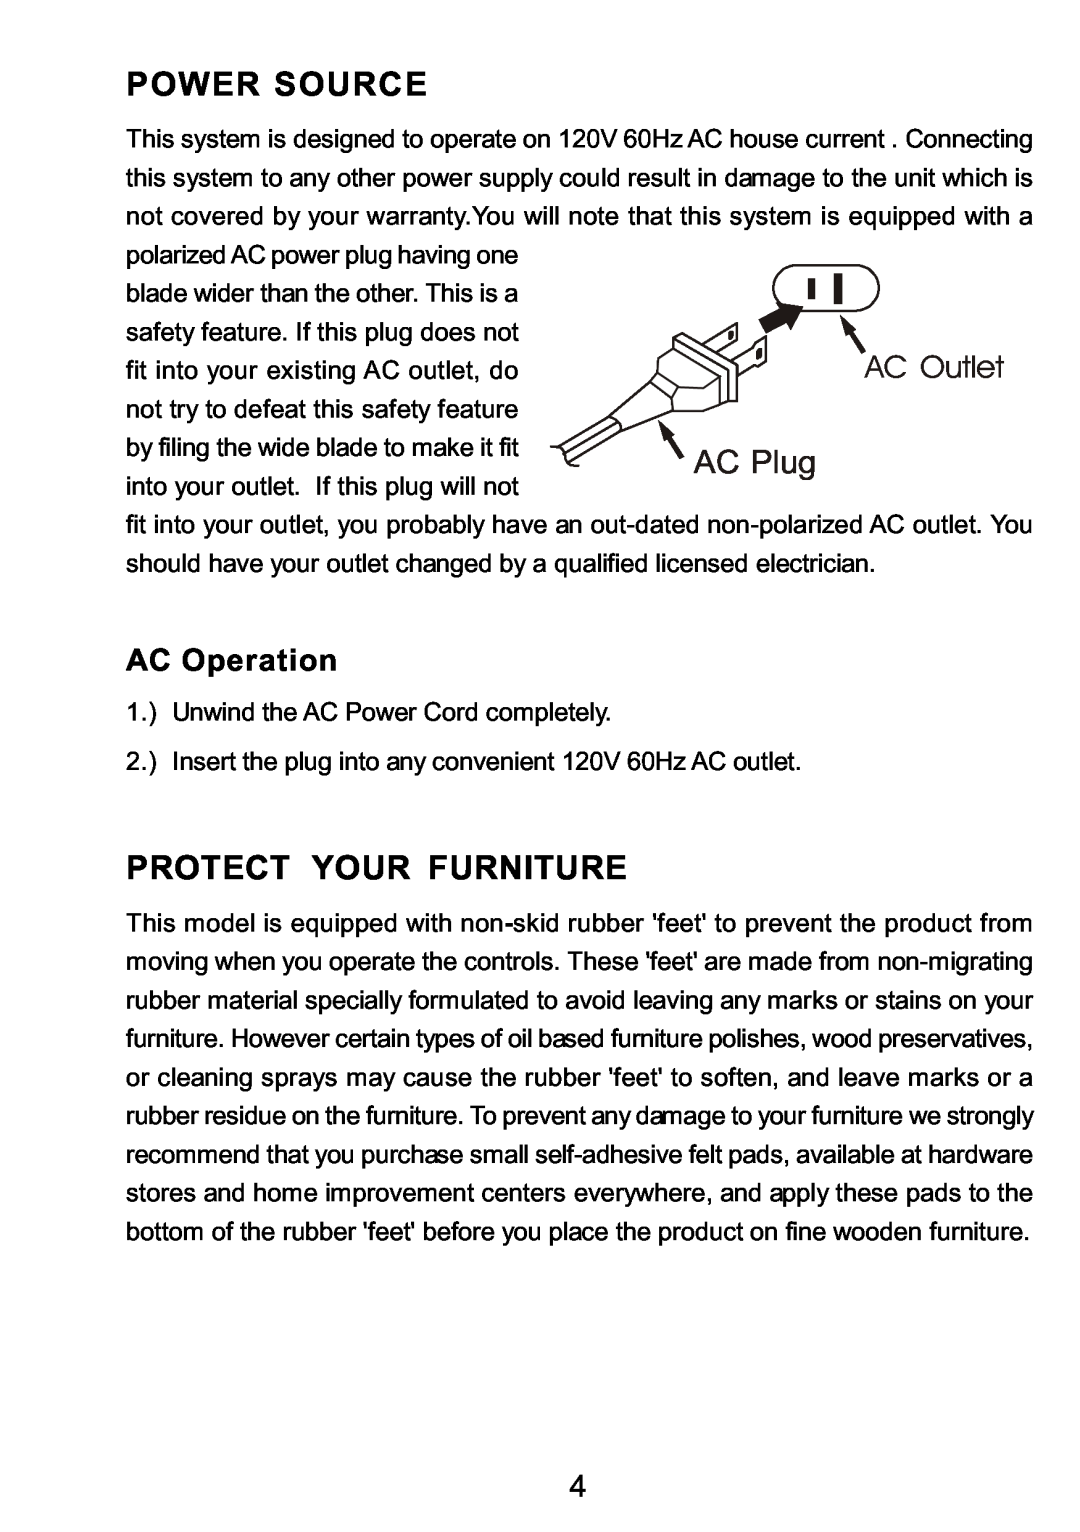 Sylvania SRCD3830 instruction manual Power Source, Protect Your Furniture, AC Operation 